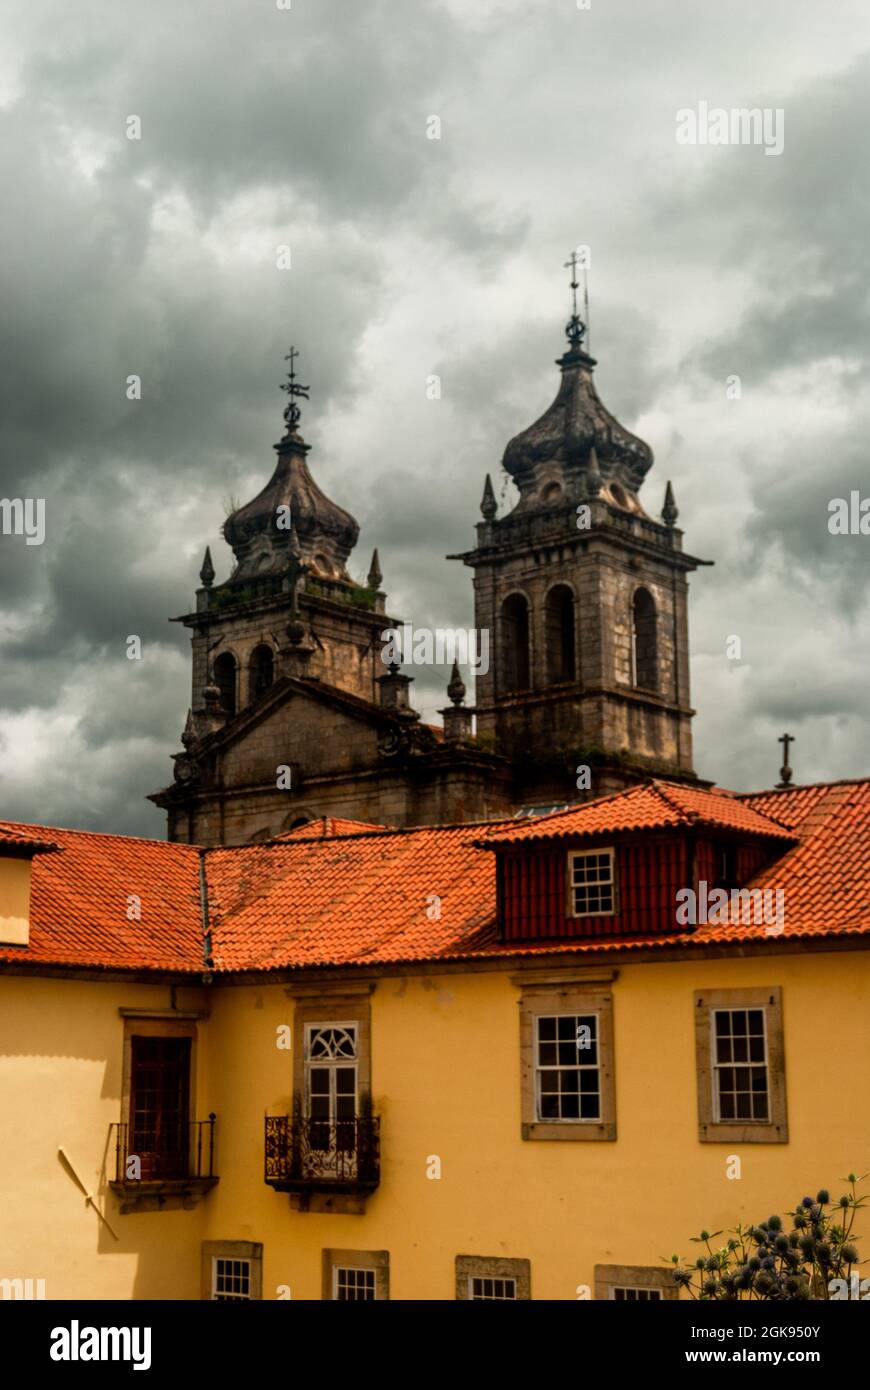 Monastery of Tibaes on a dramatic cloudy day, famous religious place of Minho region - Braga, Portugal Stock Photo